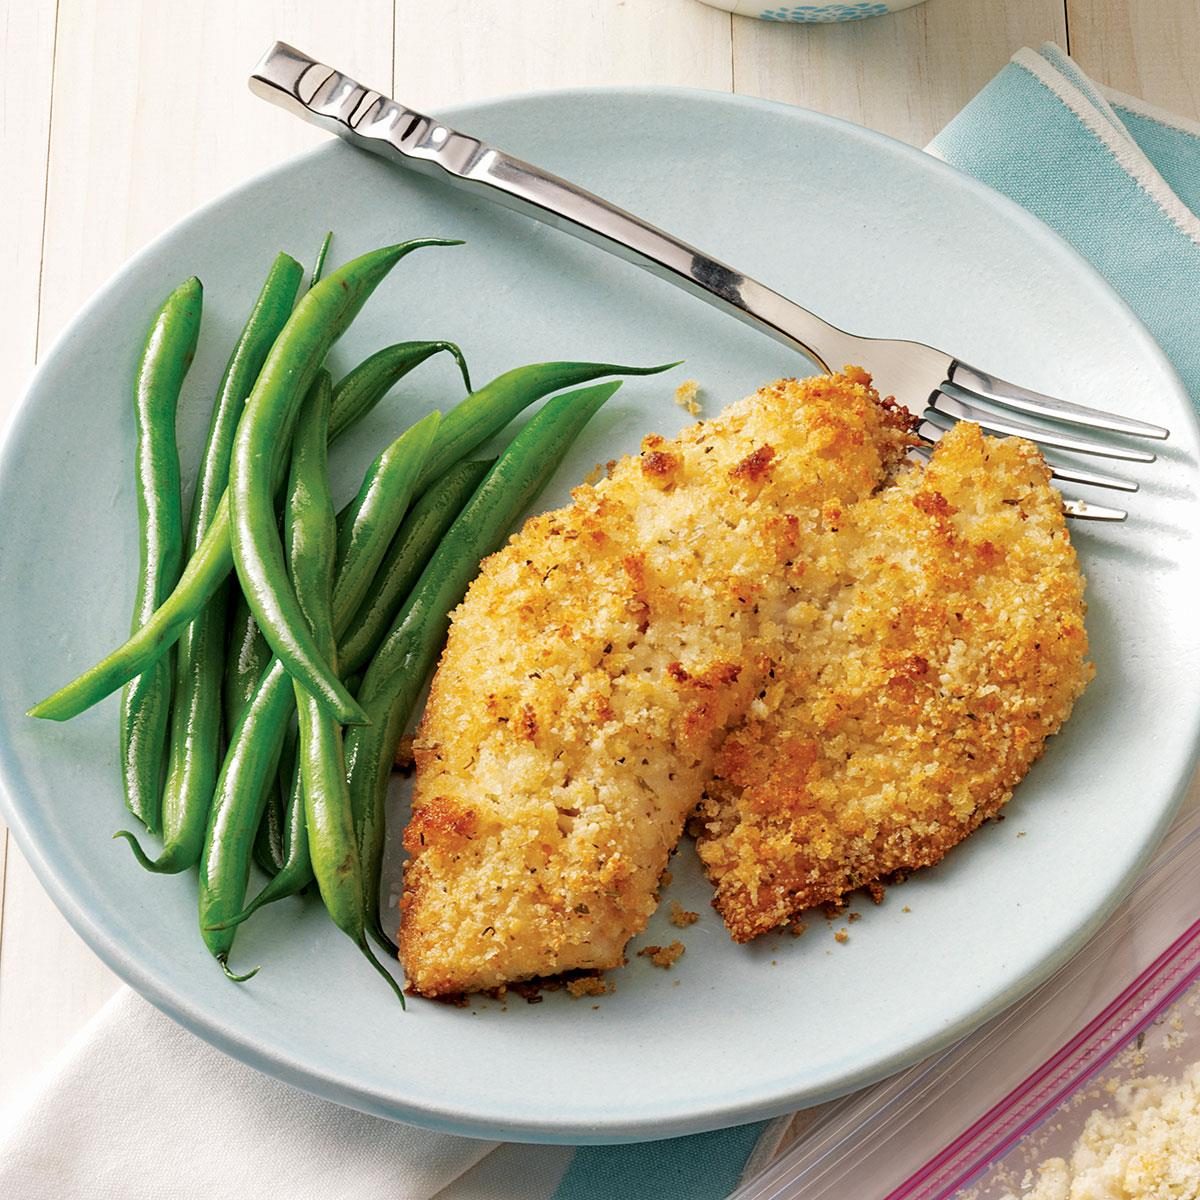 Inspired by: Parmesan-Crusted Tilapia